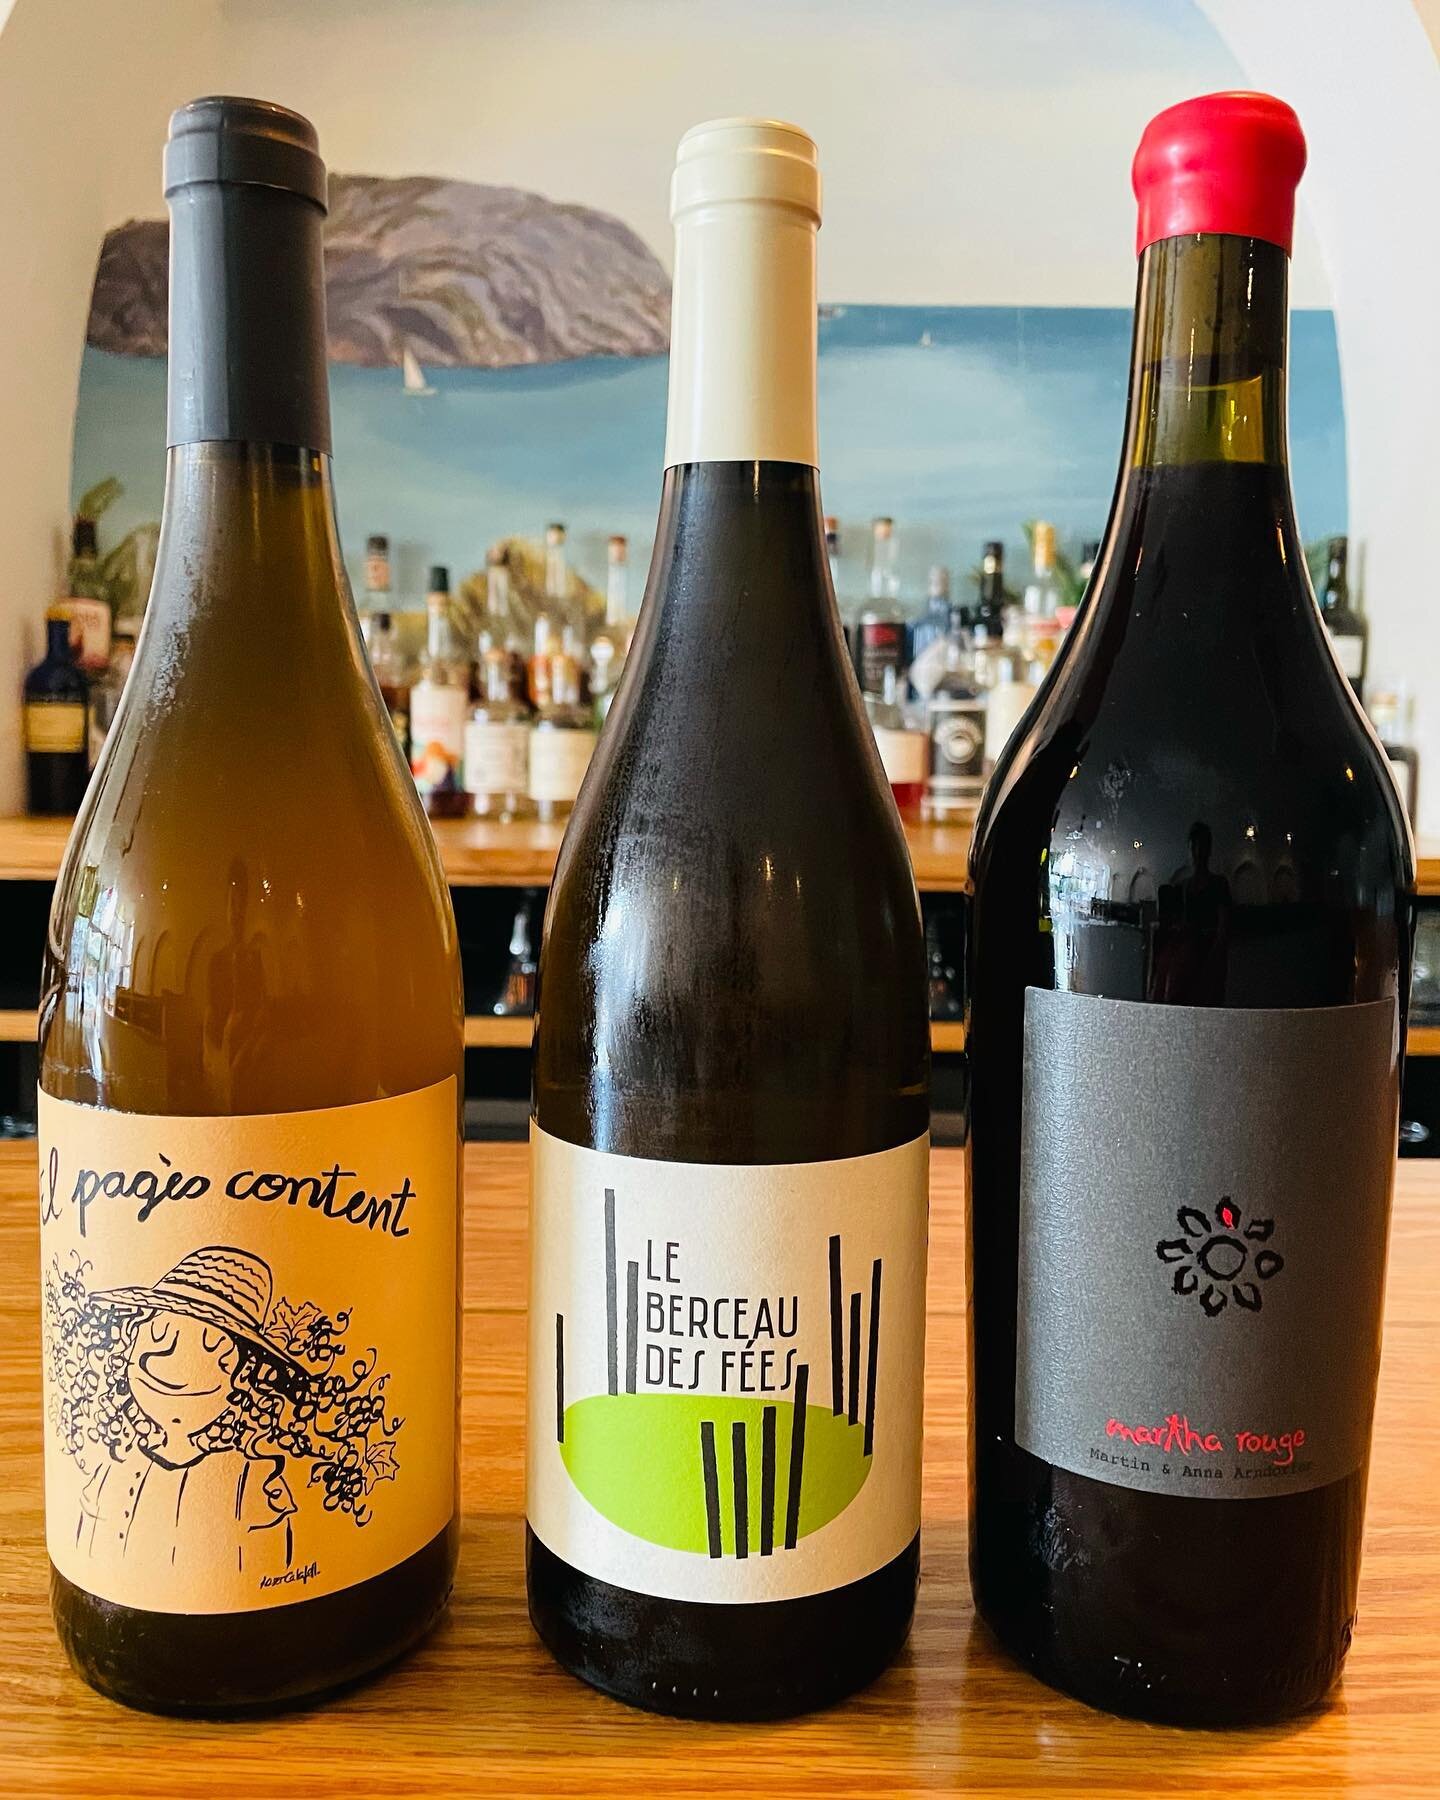 B R A N D  N E W  B O T T L E S!
Our little bottle list keeps growing! We&rsquo;re really excited about these new additions: a cult classic skin contact Xarel-lo + Parellada  from the Catalunyan maestro Toni Carb&oacute;, a gorgeous Chenin Blanc spru